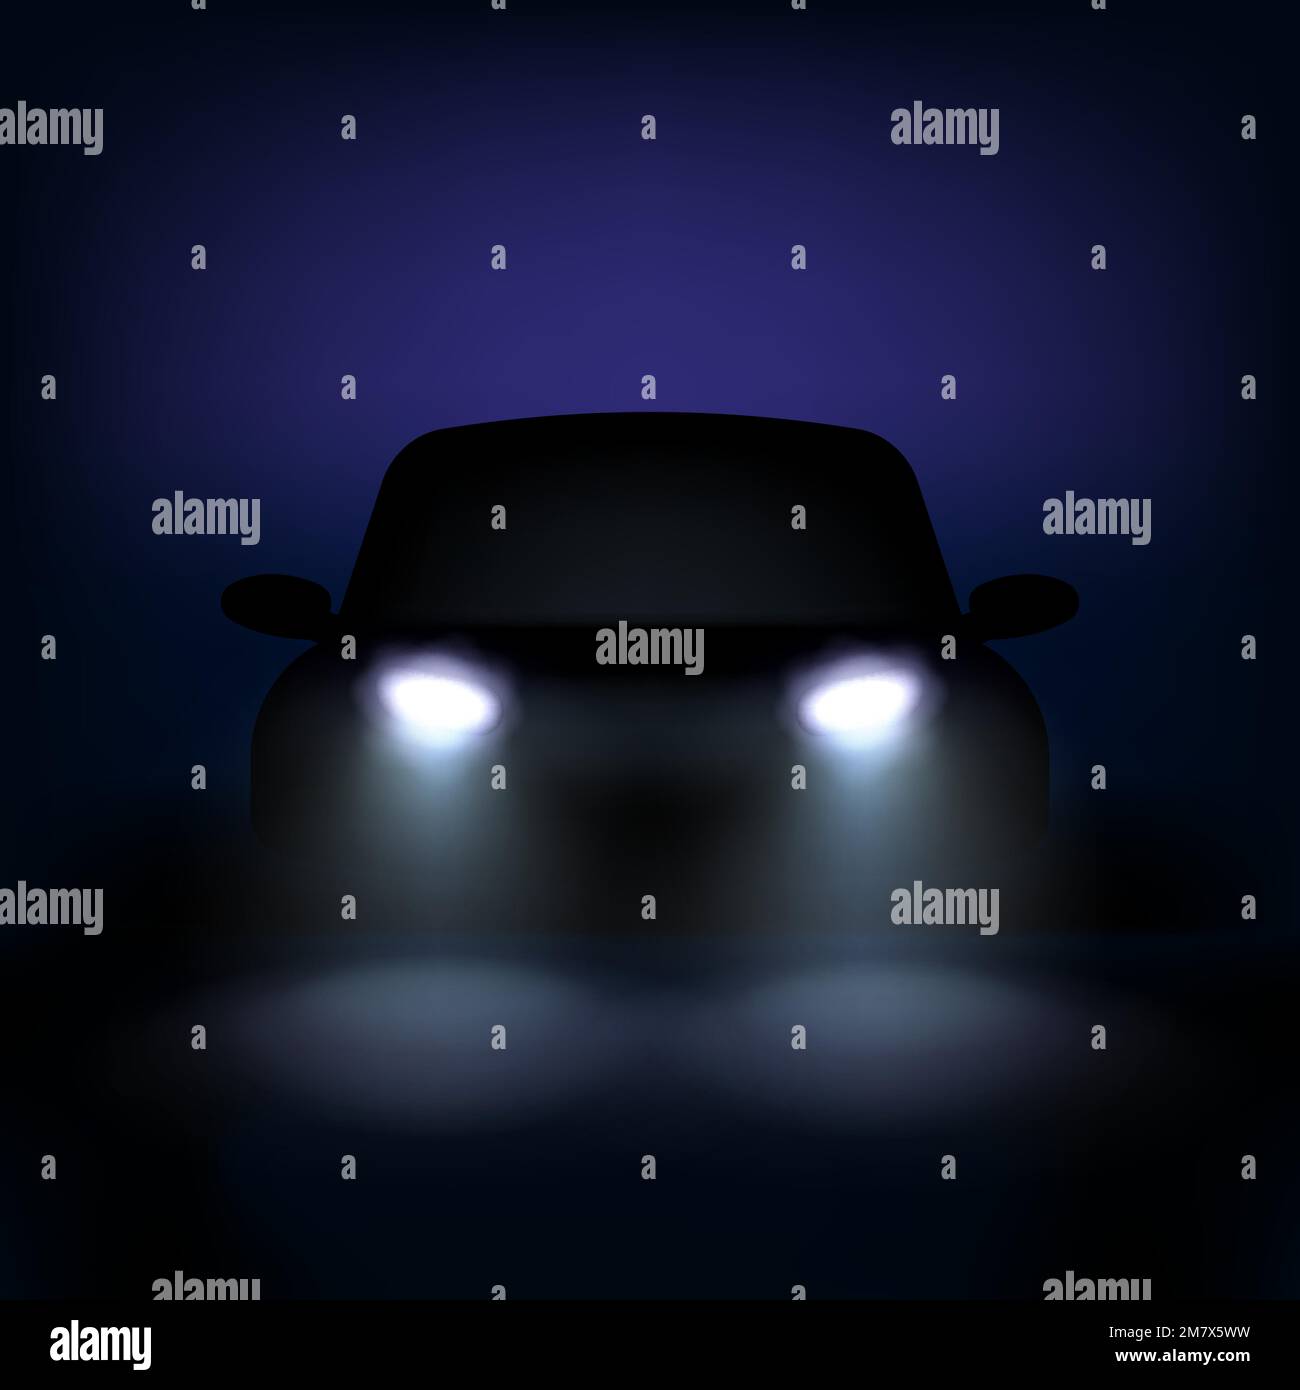 Free Vector  Car led lights realistic composition with dark silhouette of  automobile with dimmed headlights and shadows illustration